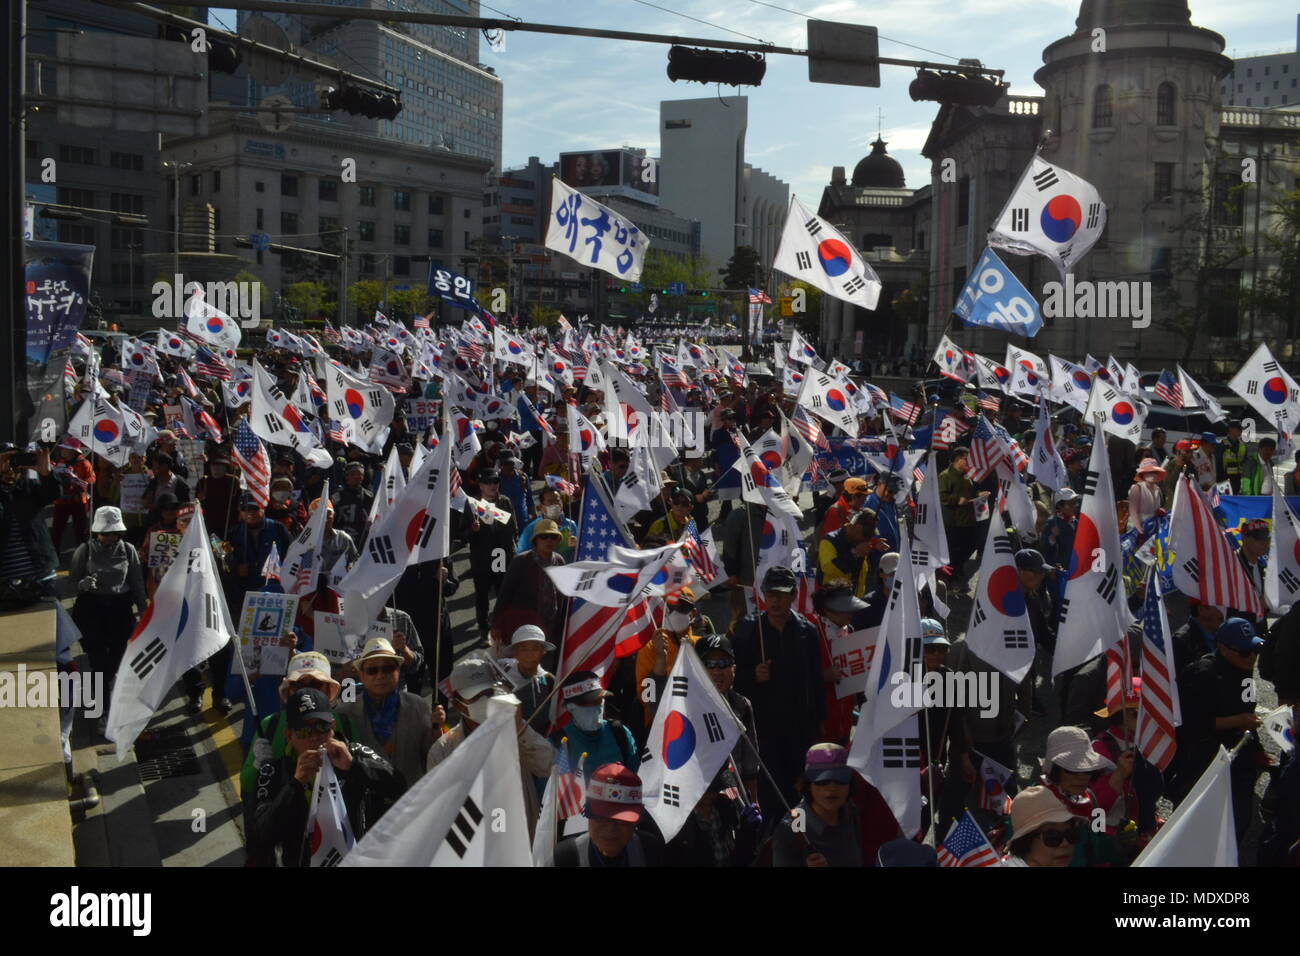 Seoul rally against President Moon Jae-in and for release of Park Gyeun-hye. Calling for declaration of war against North Korea and for the US to strengthen their alliance with South Korea. 21st April 2018 Stock Photo